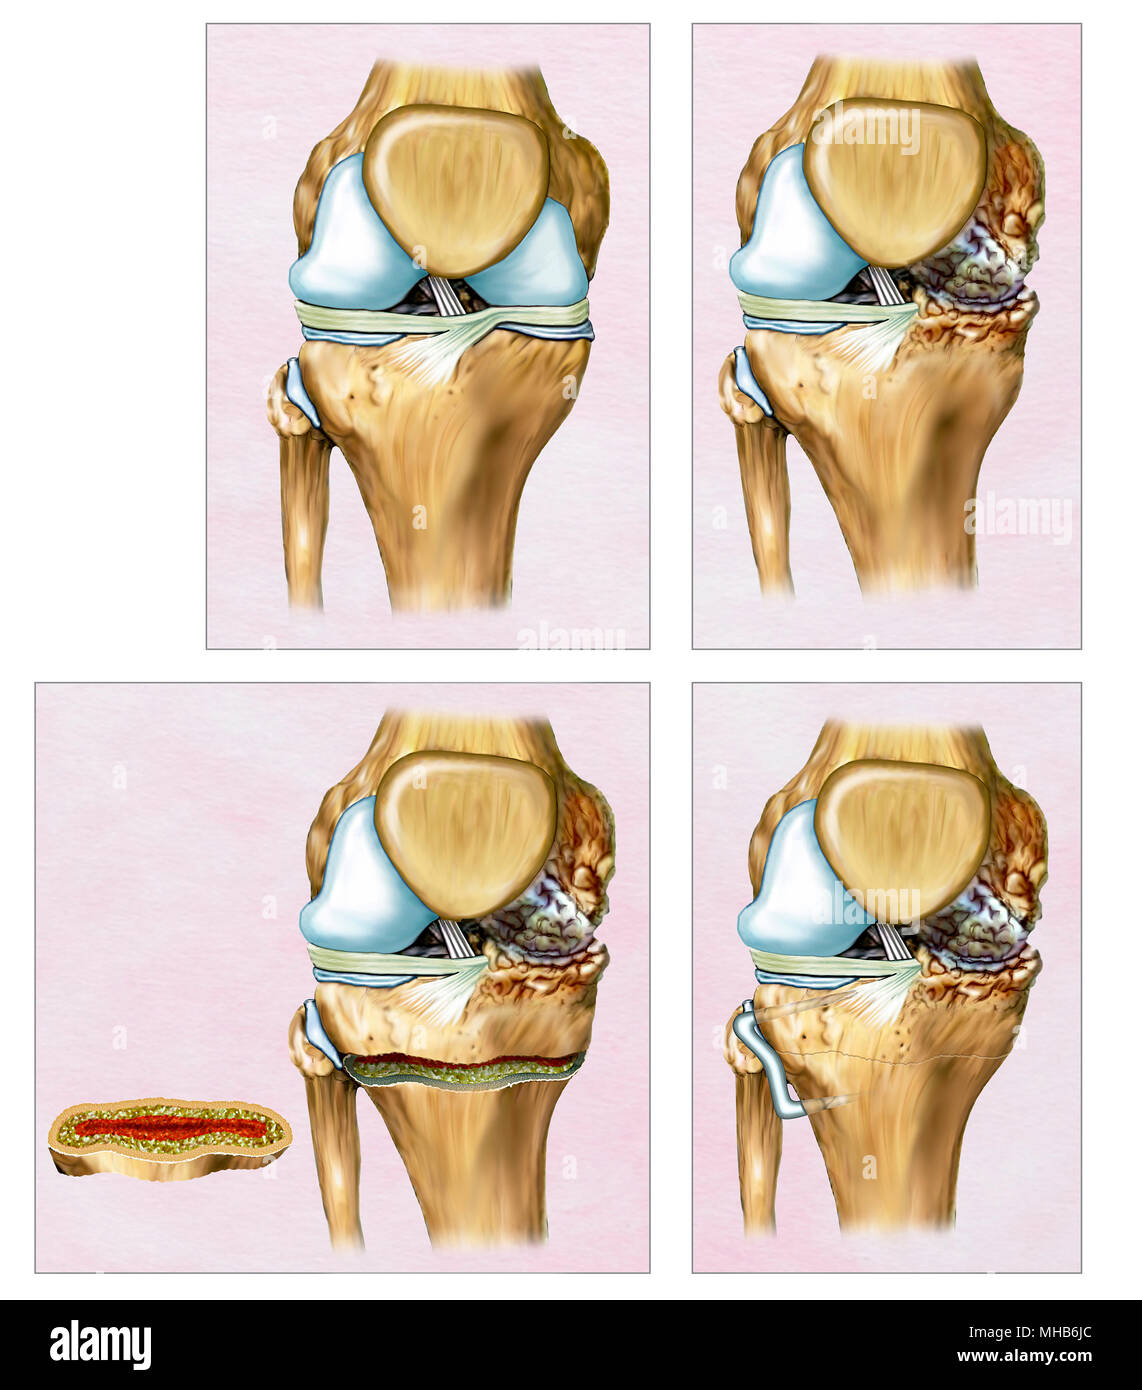 Descriptive illustration an Osteotomy or correction of the knee  the Stock Photo